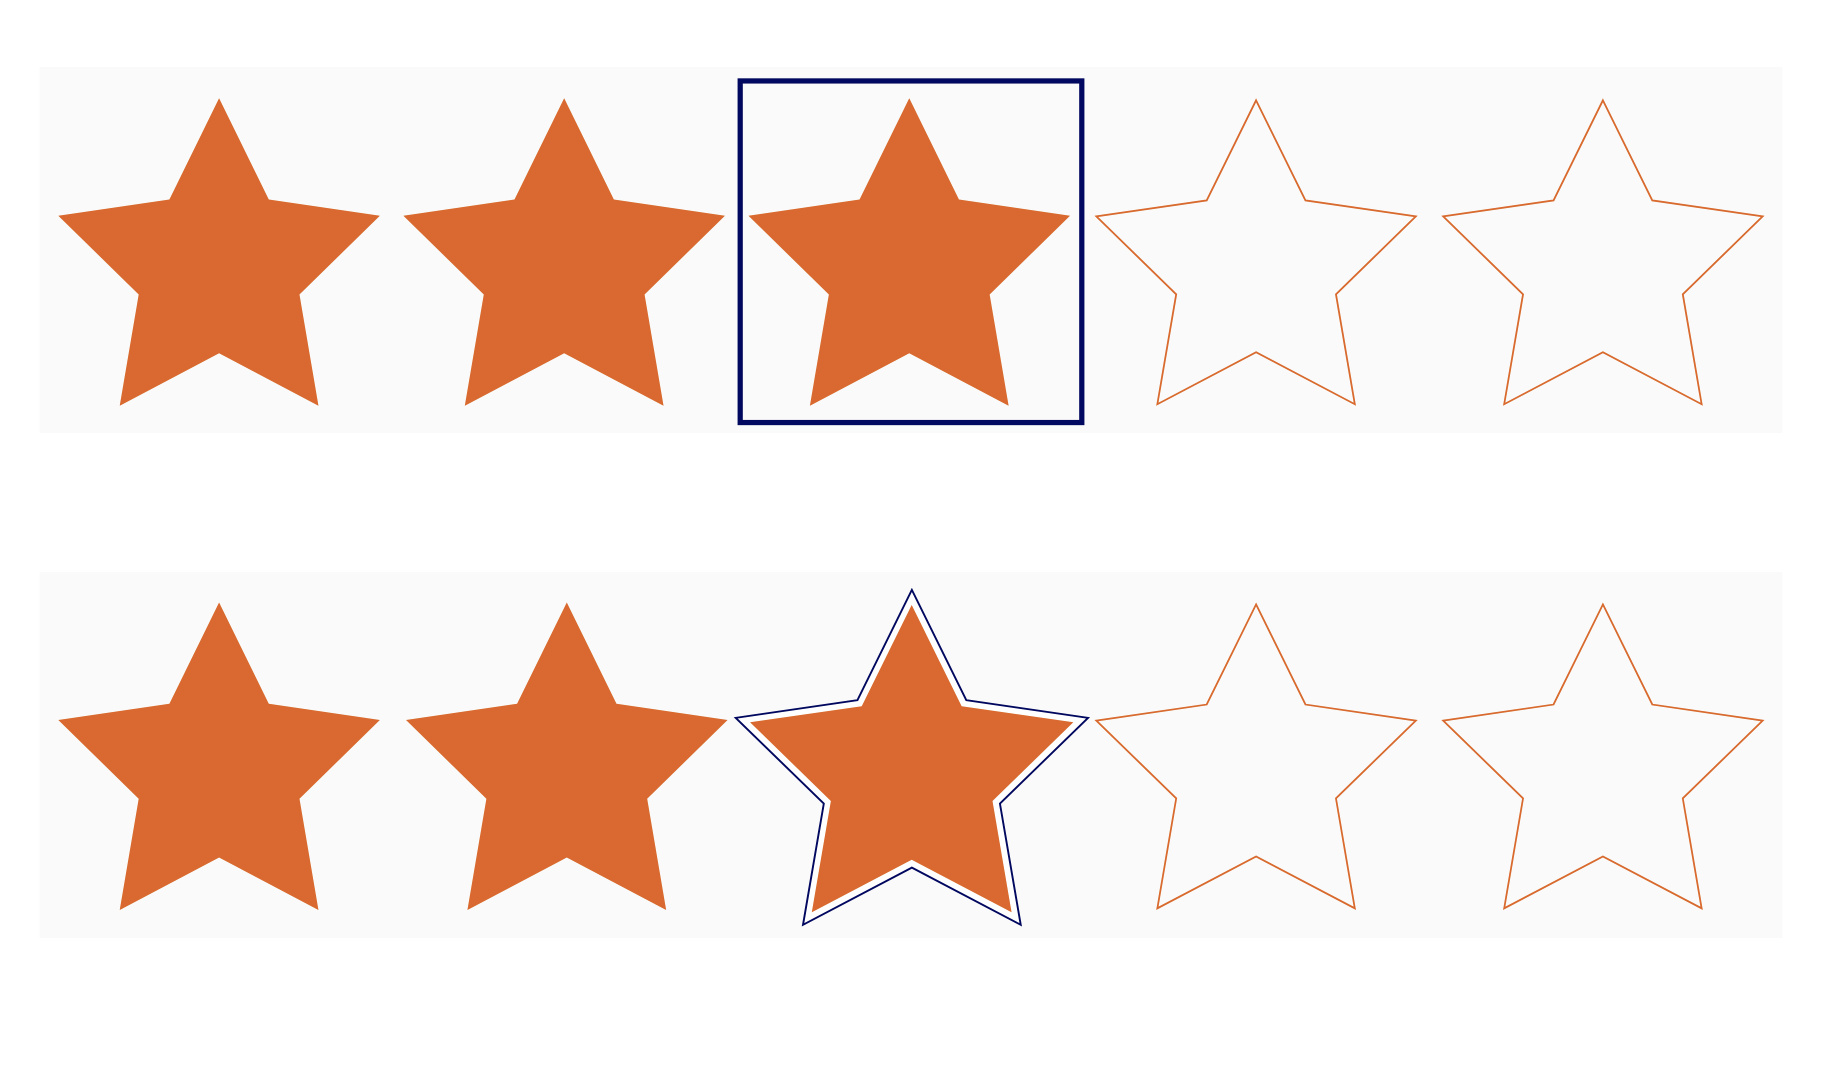 Two sets of star ratings. In both sets, the same three stars have been selected, and the focus indicator is visible on the third star. In the first set, the focus indicator is a rectangular outline bounding the star. In the second set, the focus indicator is a star-shaped solid outline that surrounds the star.